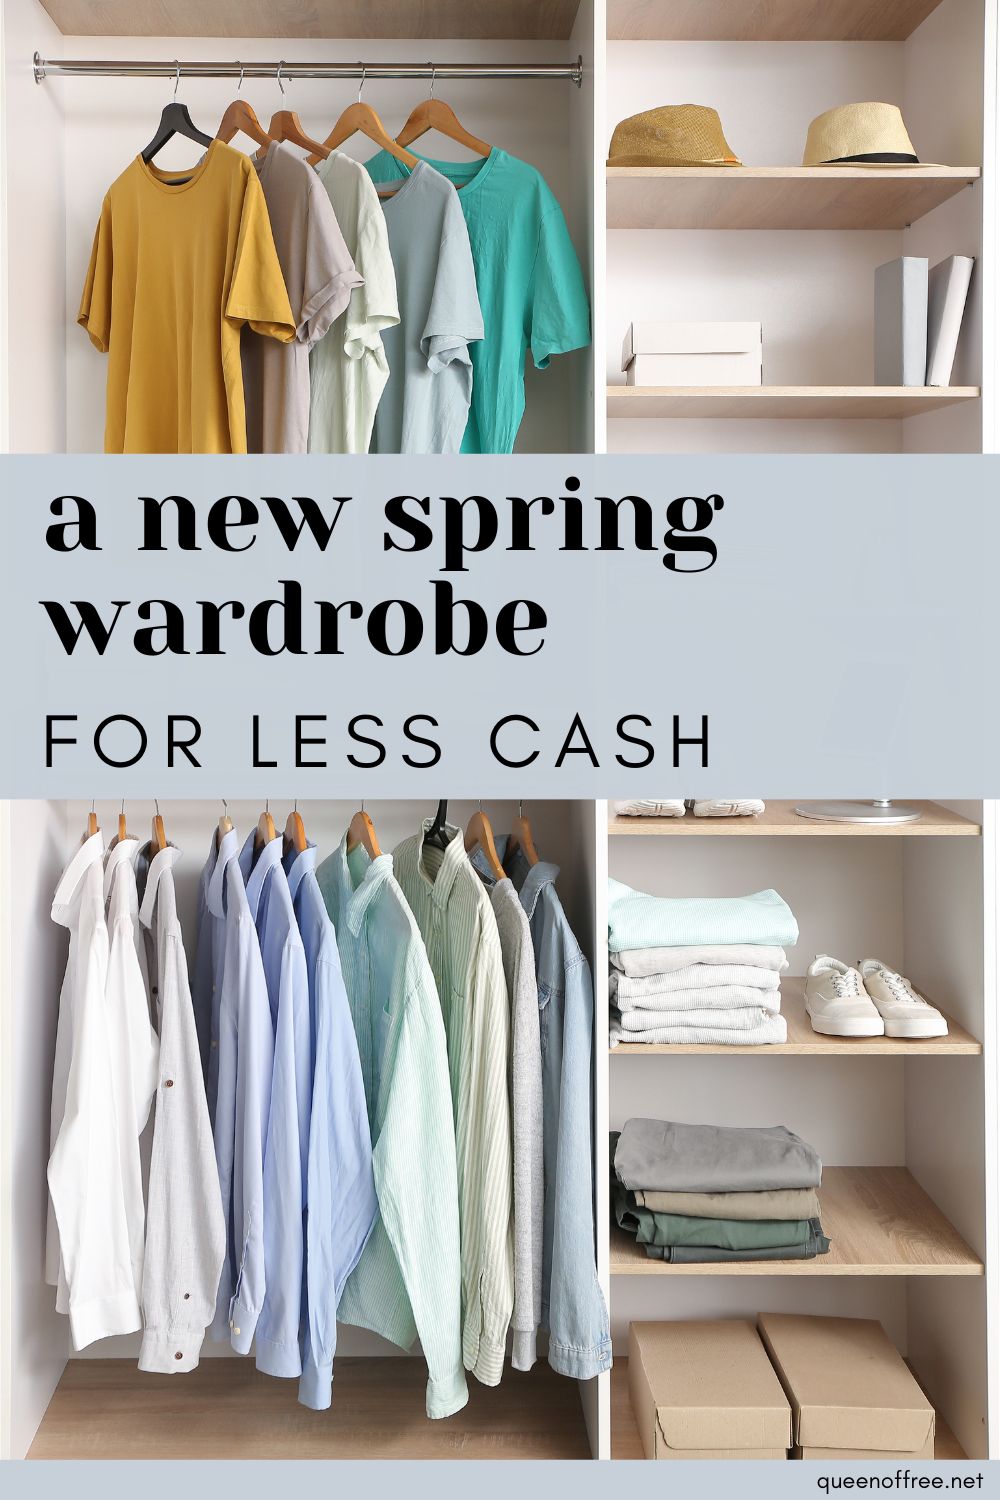 Bring on the sunshine! But switching over your winter wardrobe can cost a pretty penny. Get a new Spring Wardrobe for less cash.